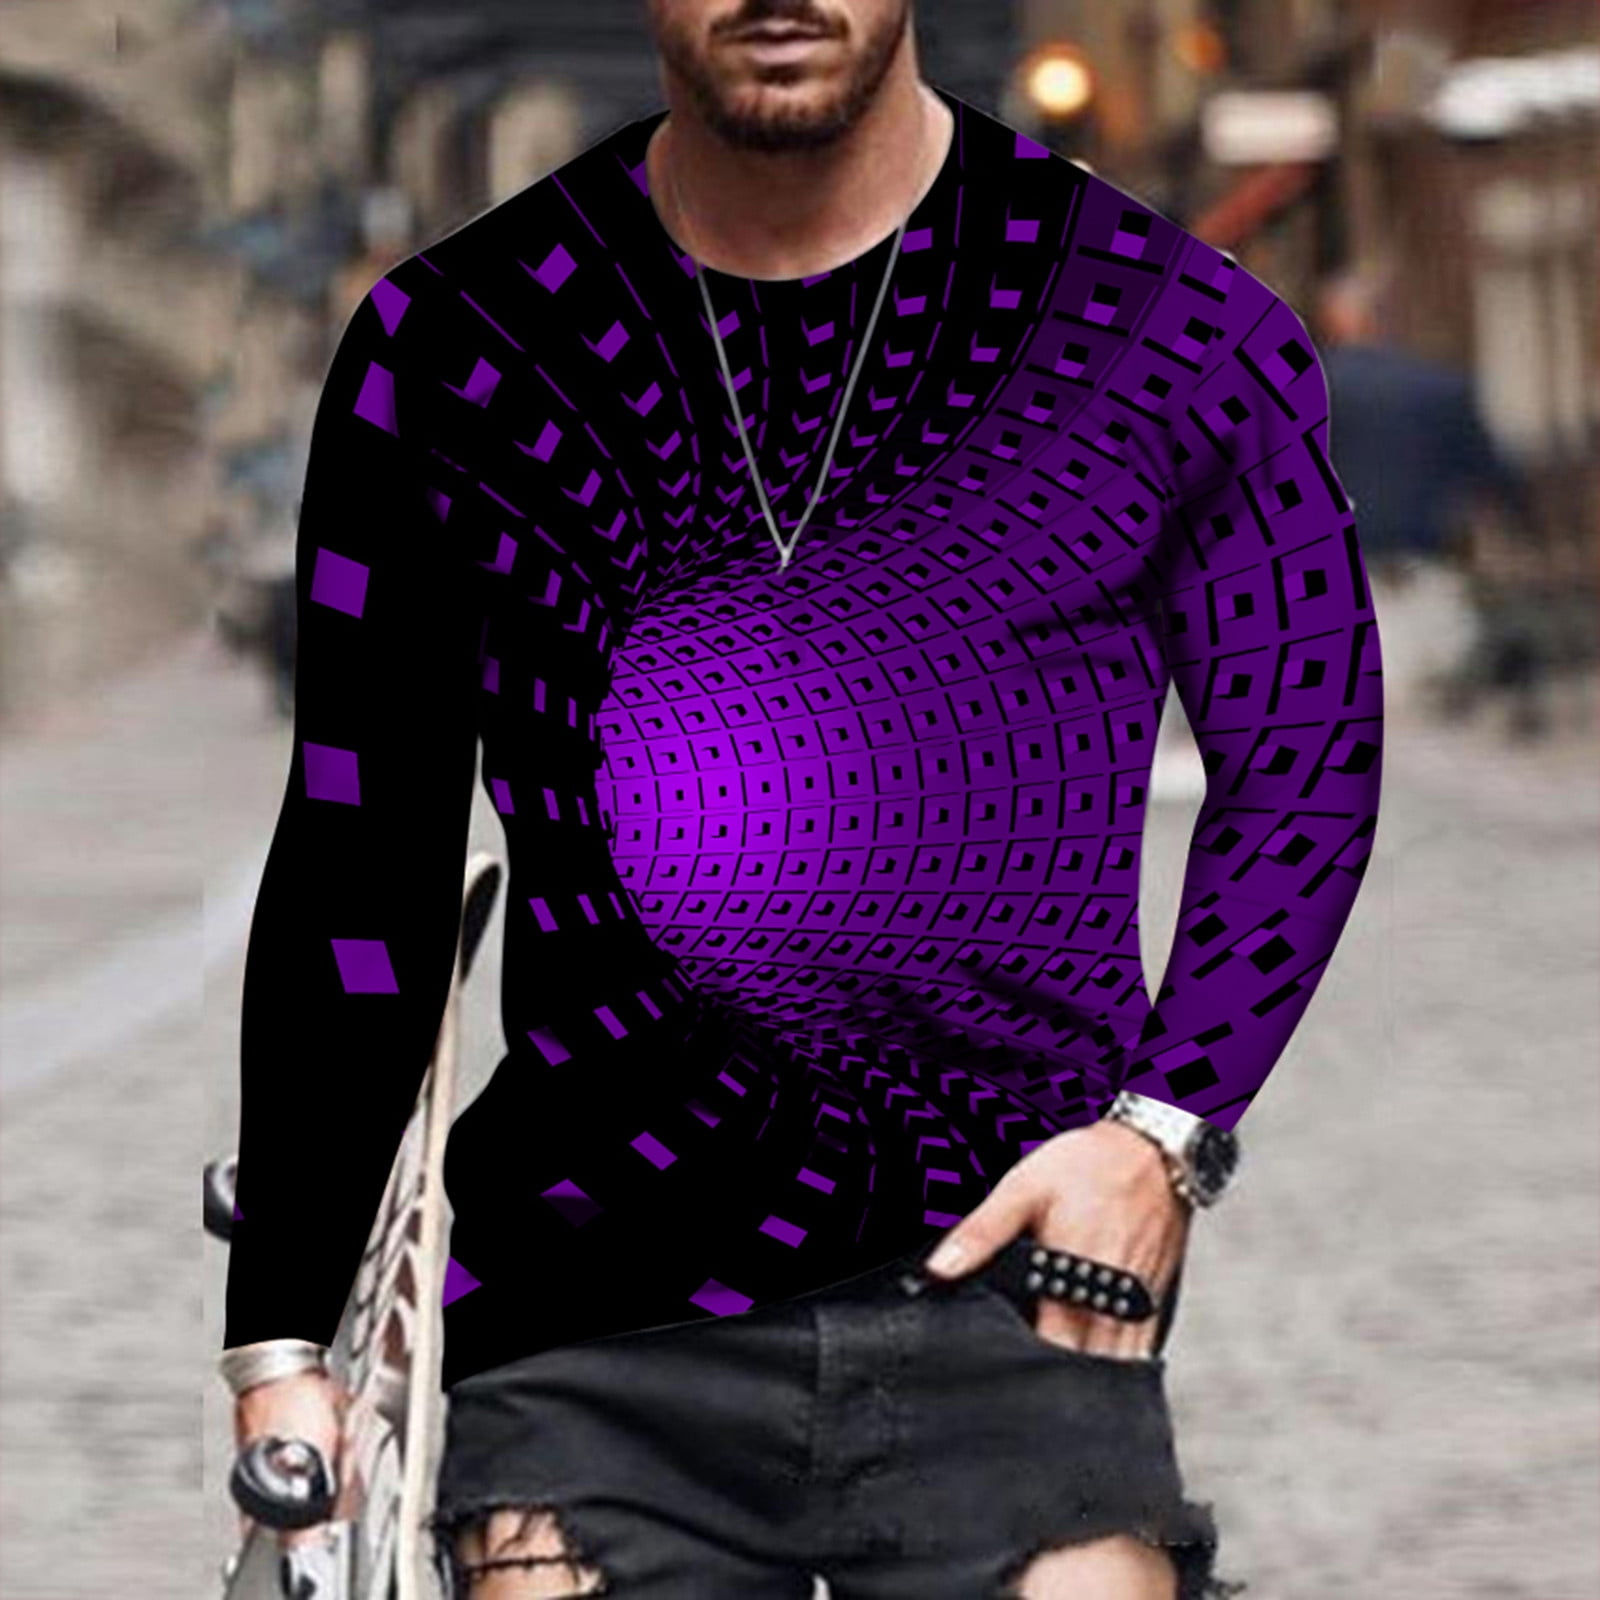 Mens Long Sleeve Halter Neck Slim Fit Shirts Hollow Out Party Muscle Blouse  Tops